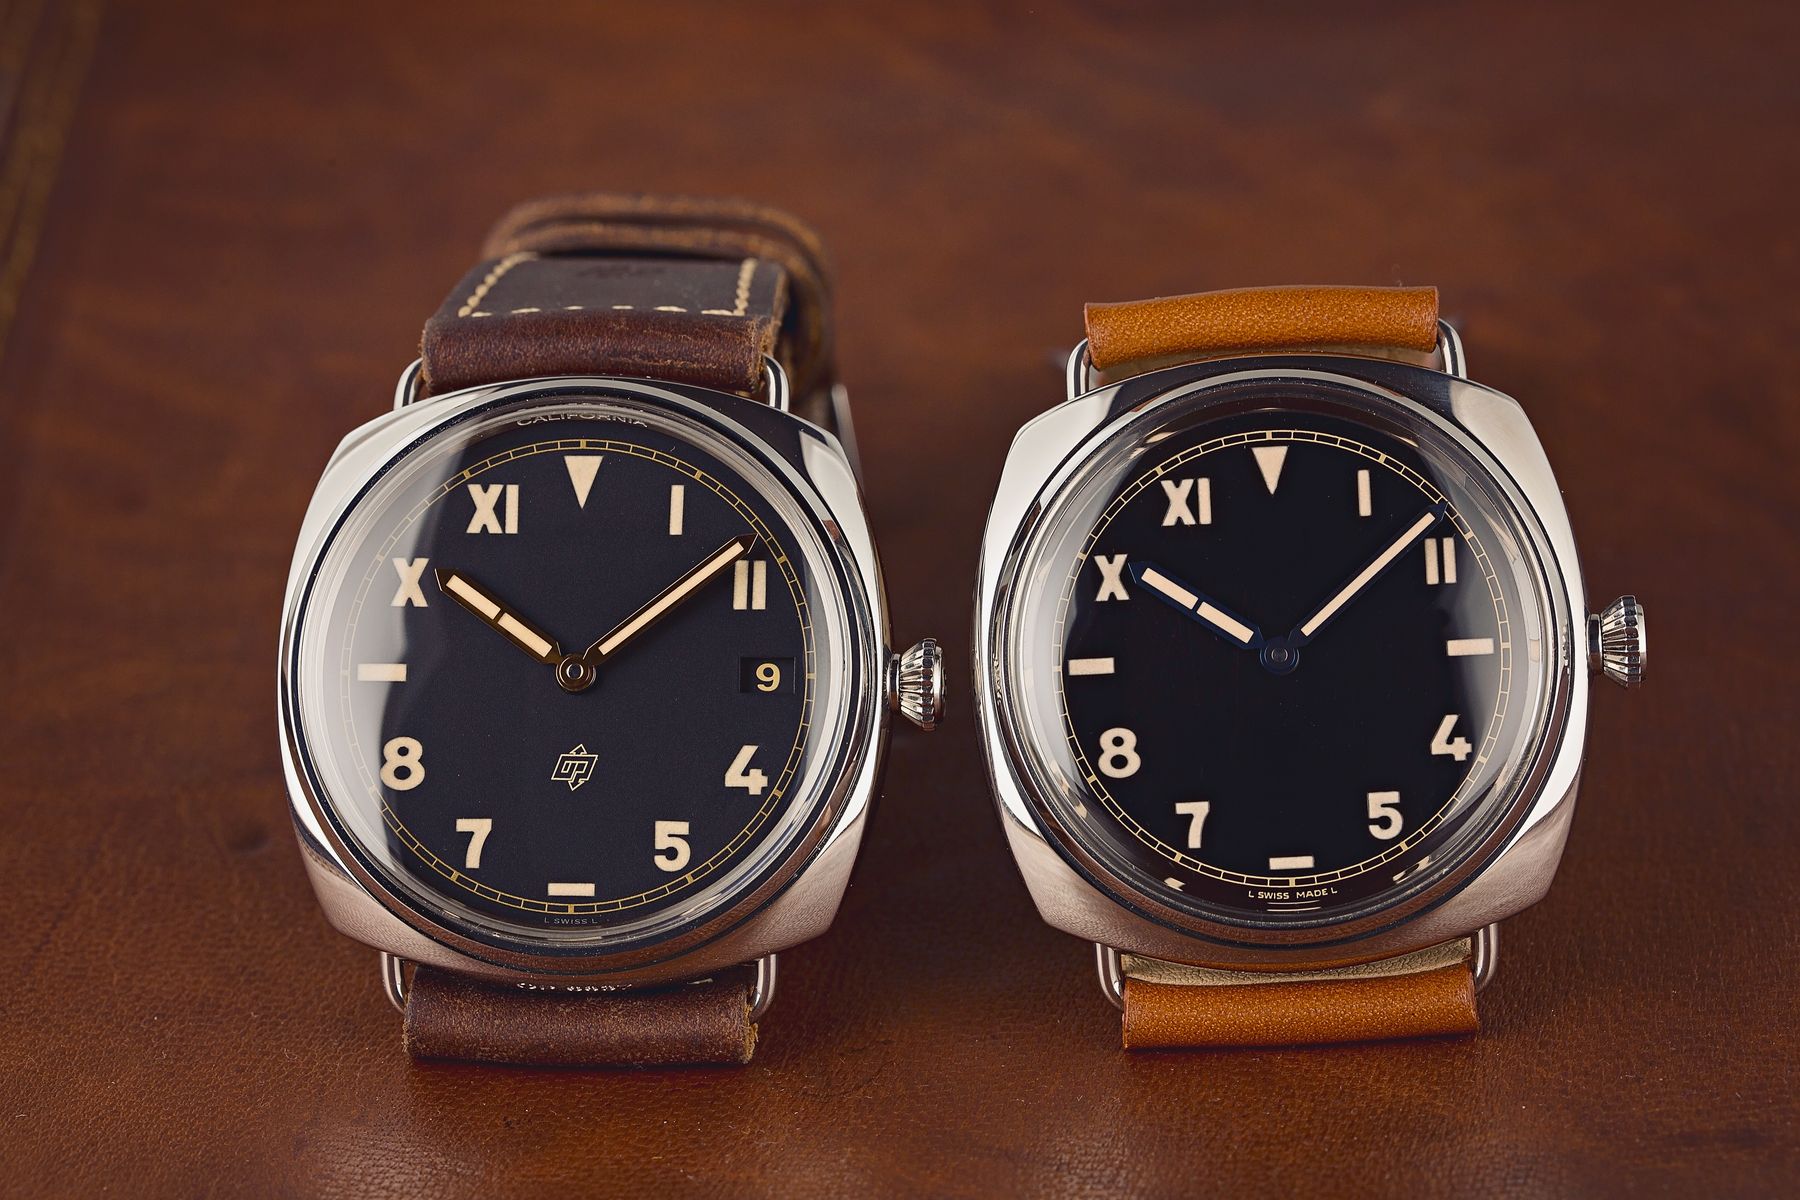 Panerai California Dials and the Rolex Connection